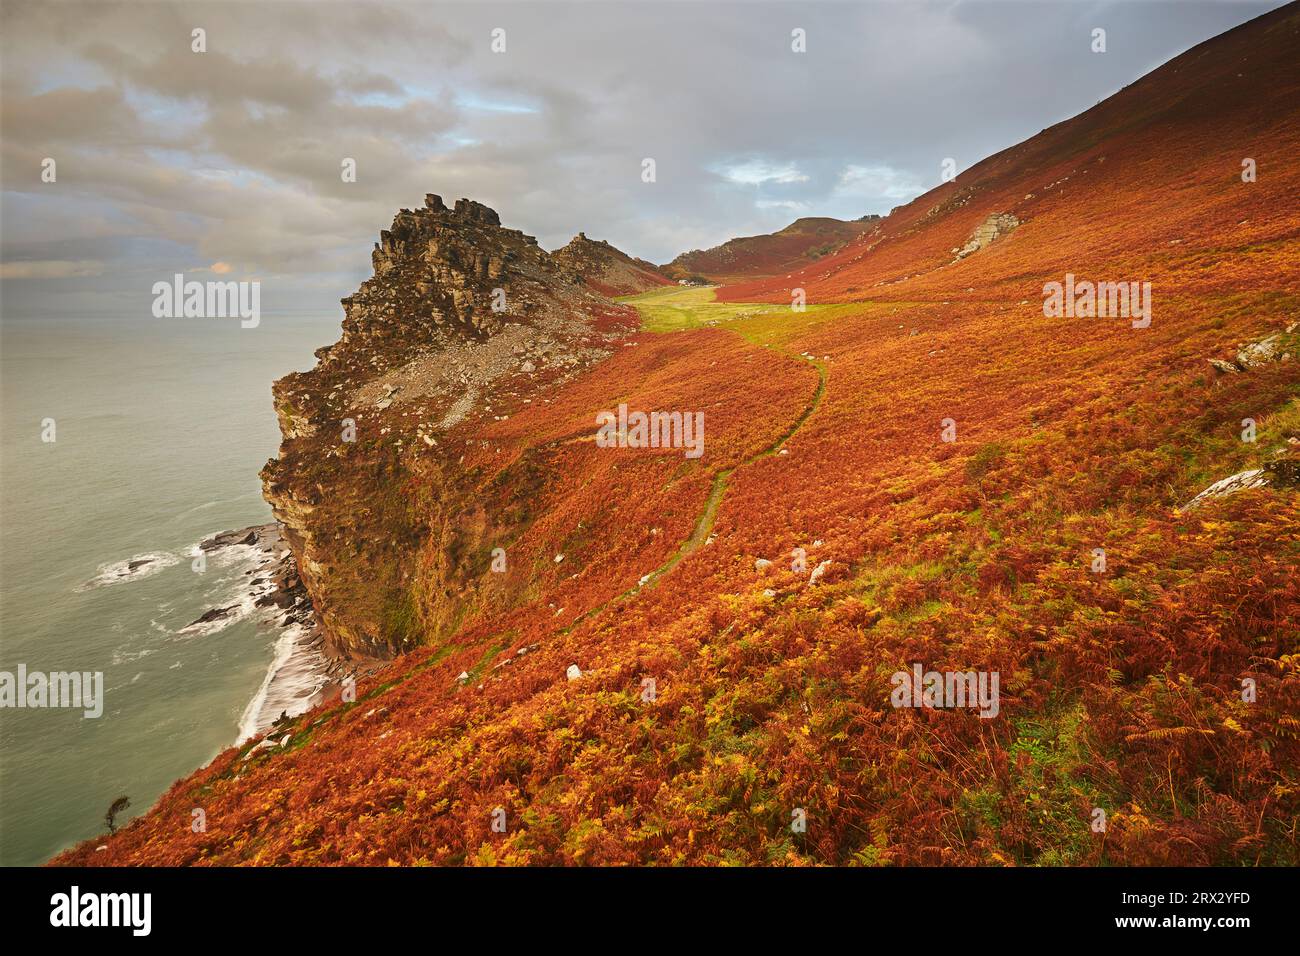 An autumn evening view of the cliffs and rocks at the Valley of Rocks, north Devon coast near Lynton, Exmoor National Park, Devon, England Stock Photo